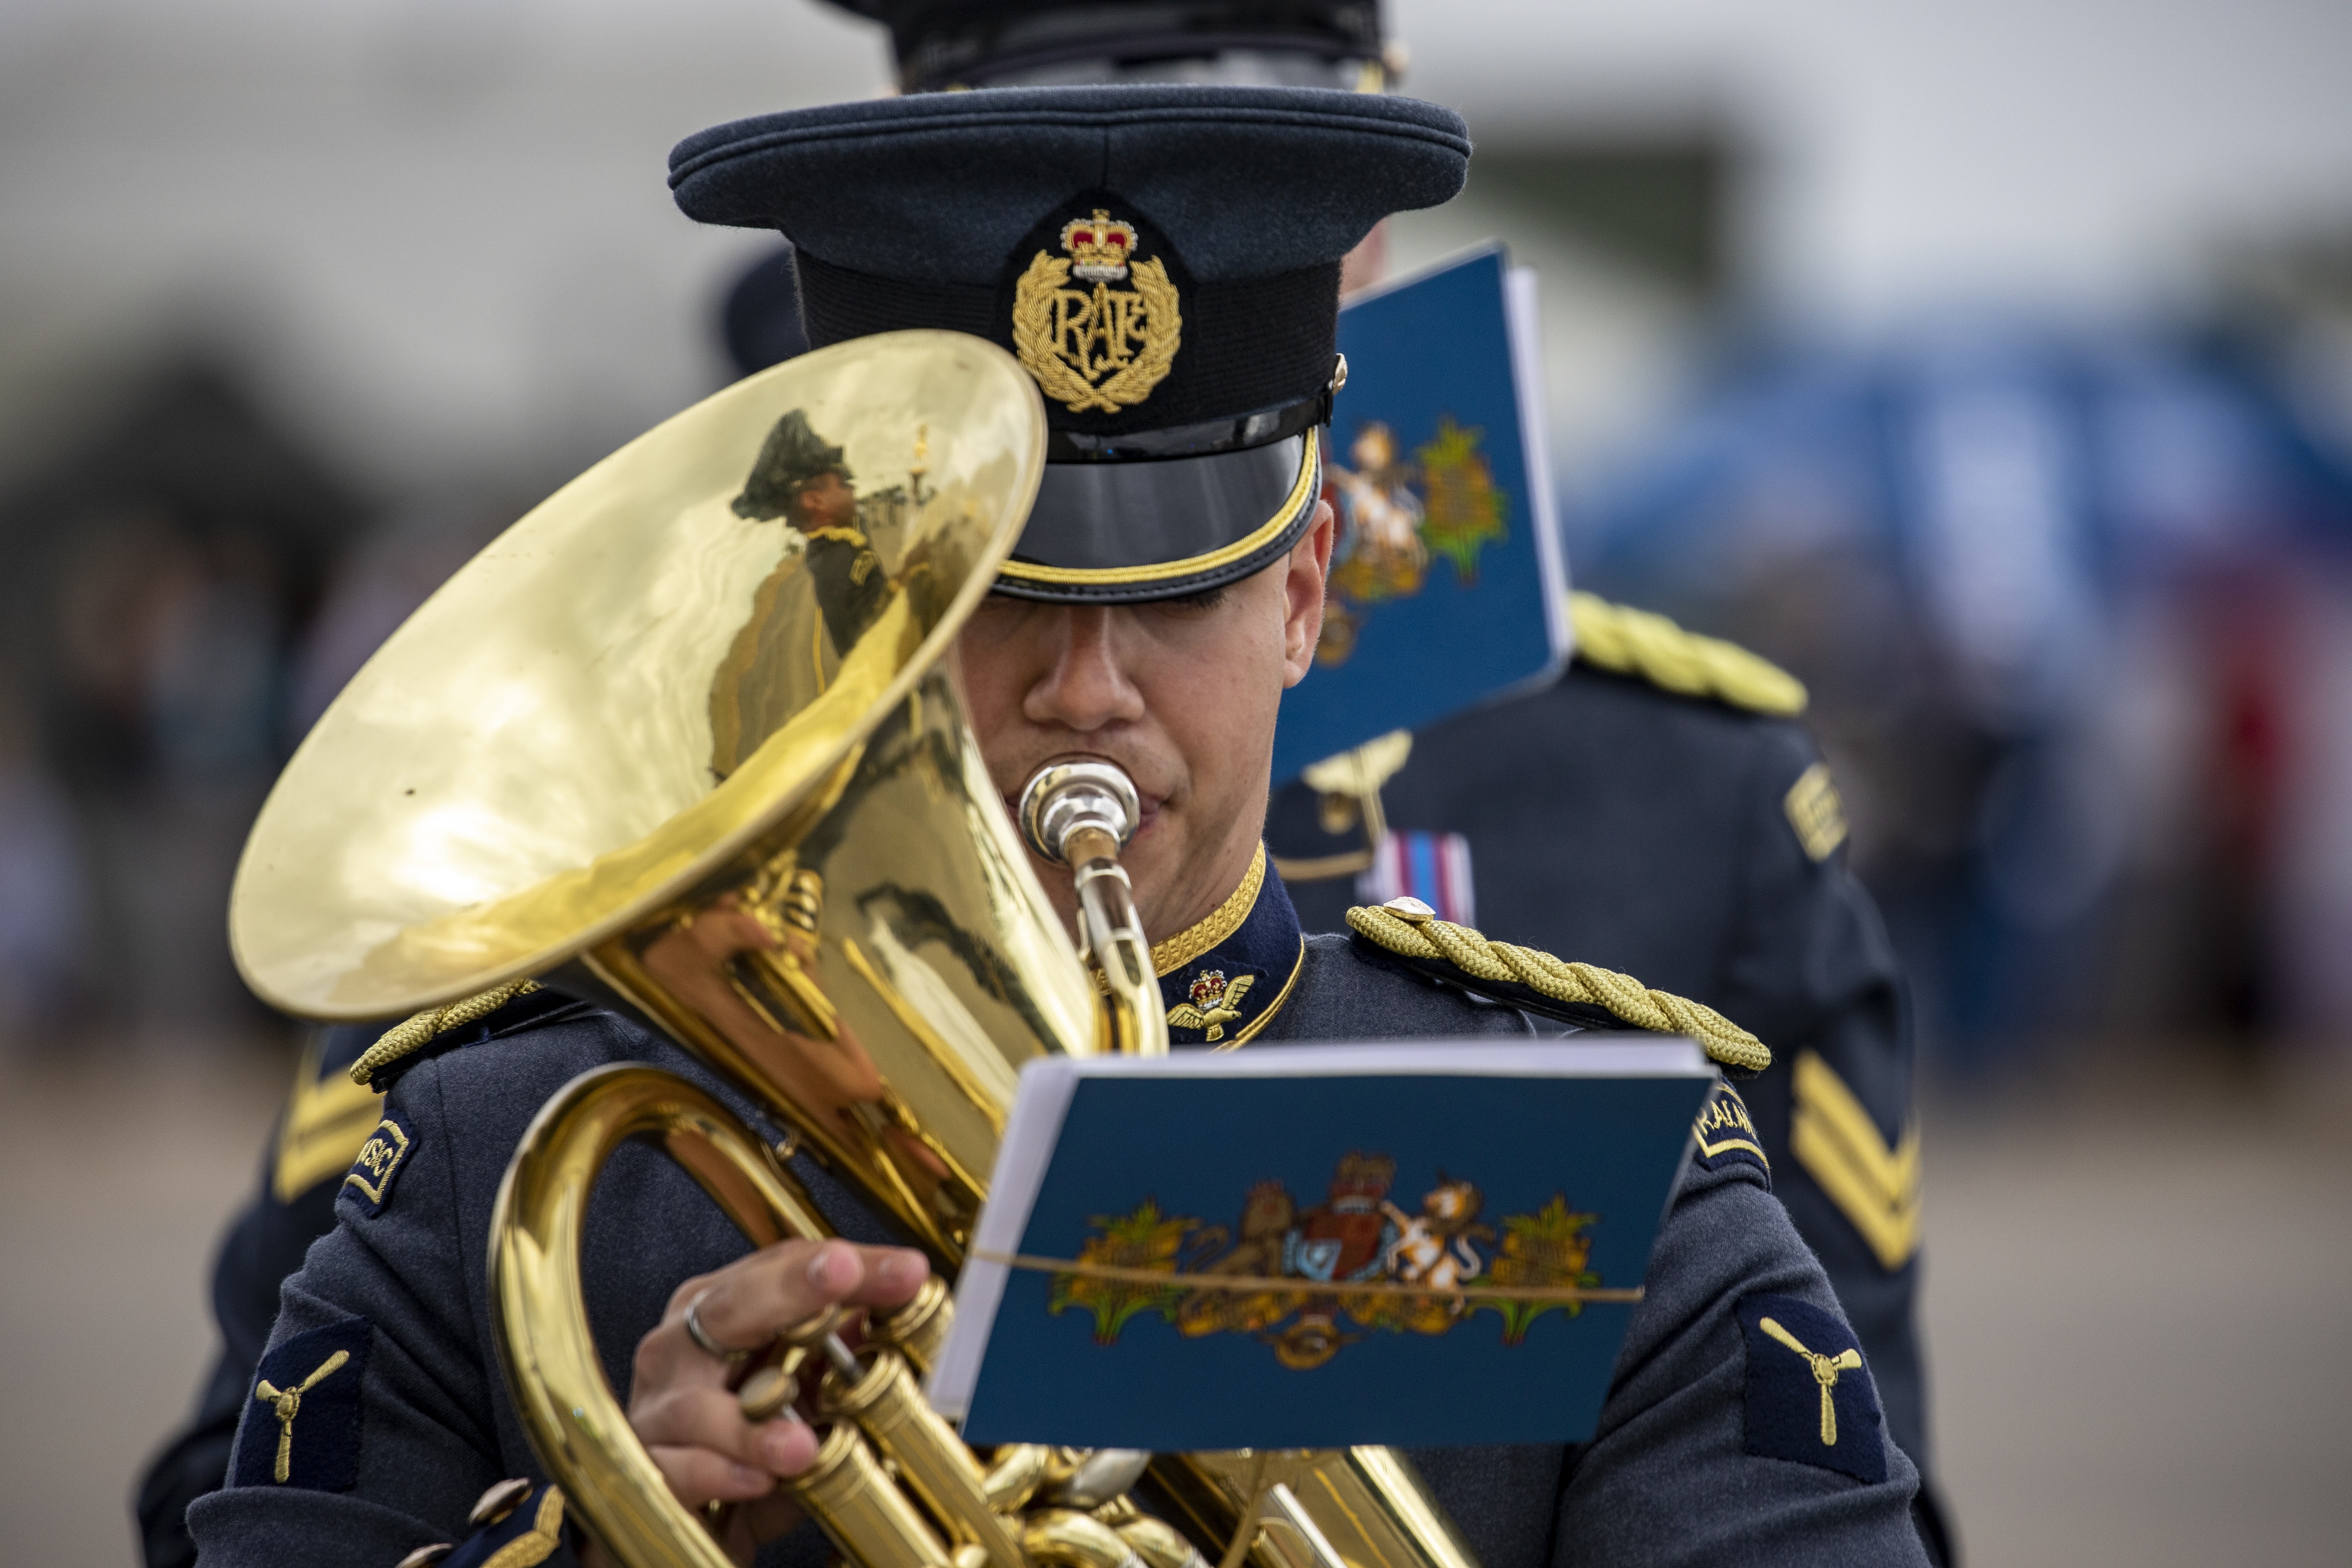 Families’ Day was accompanied by the Band of the RAF College Cranwell